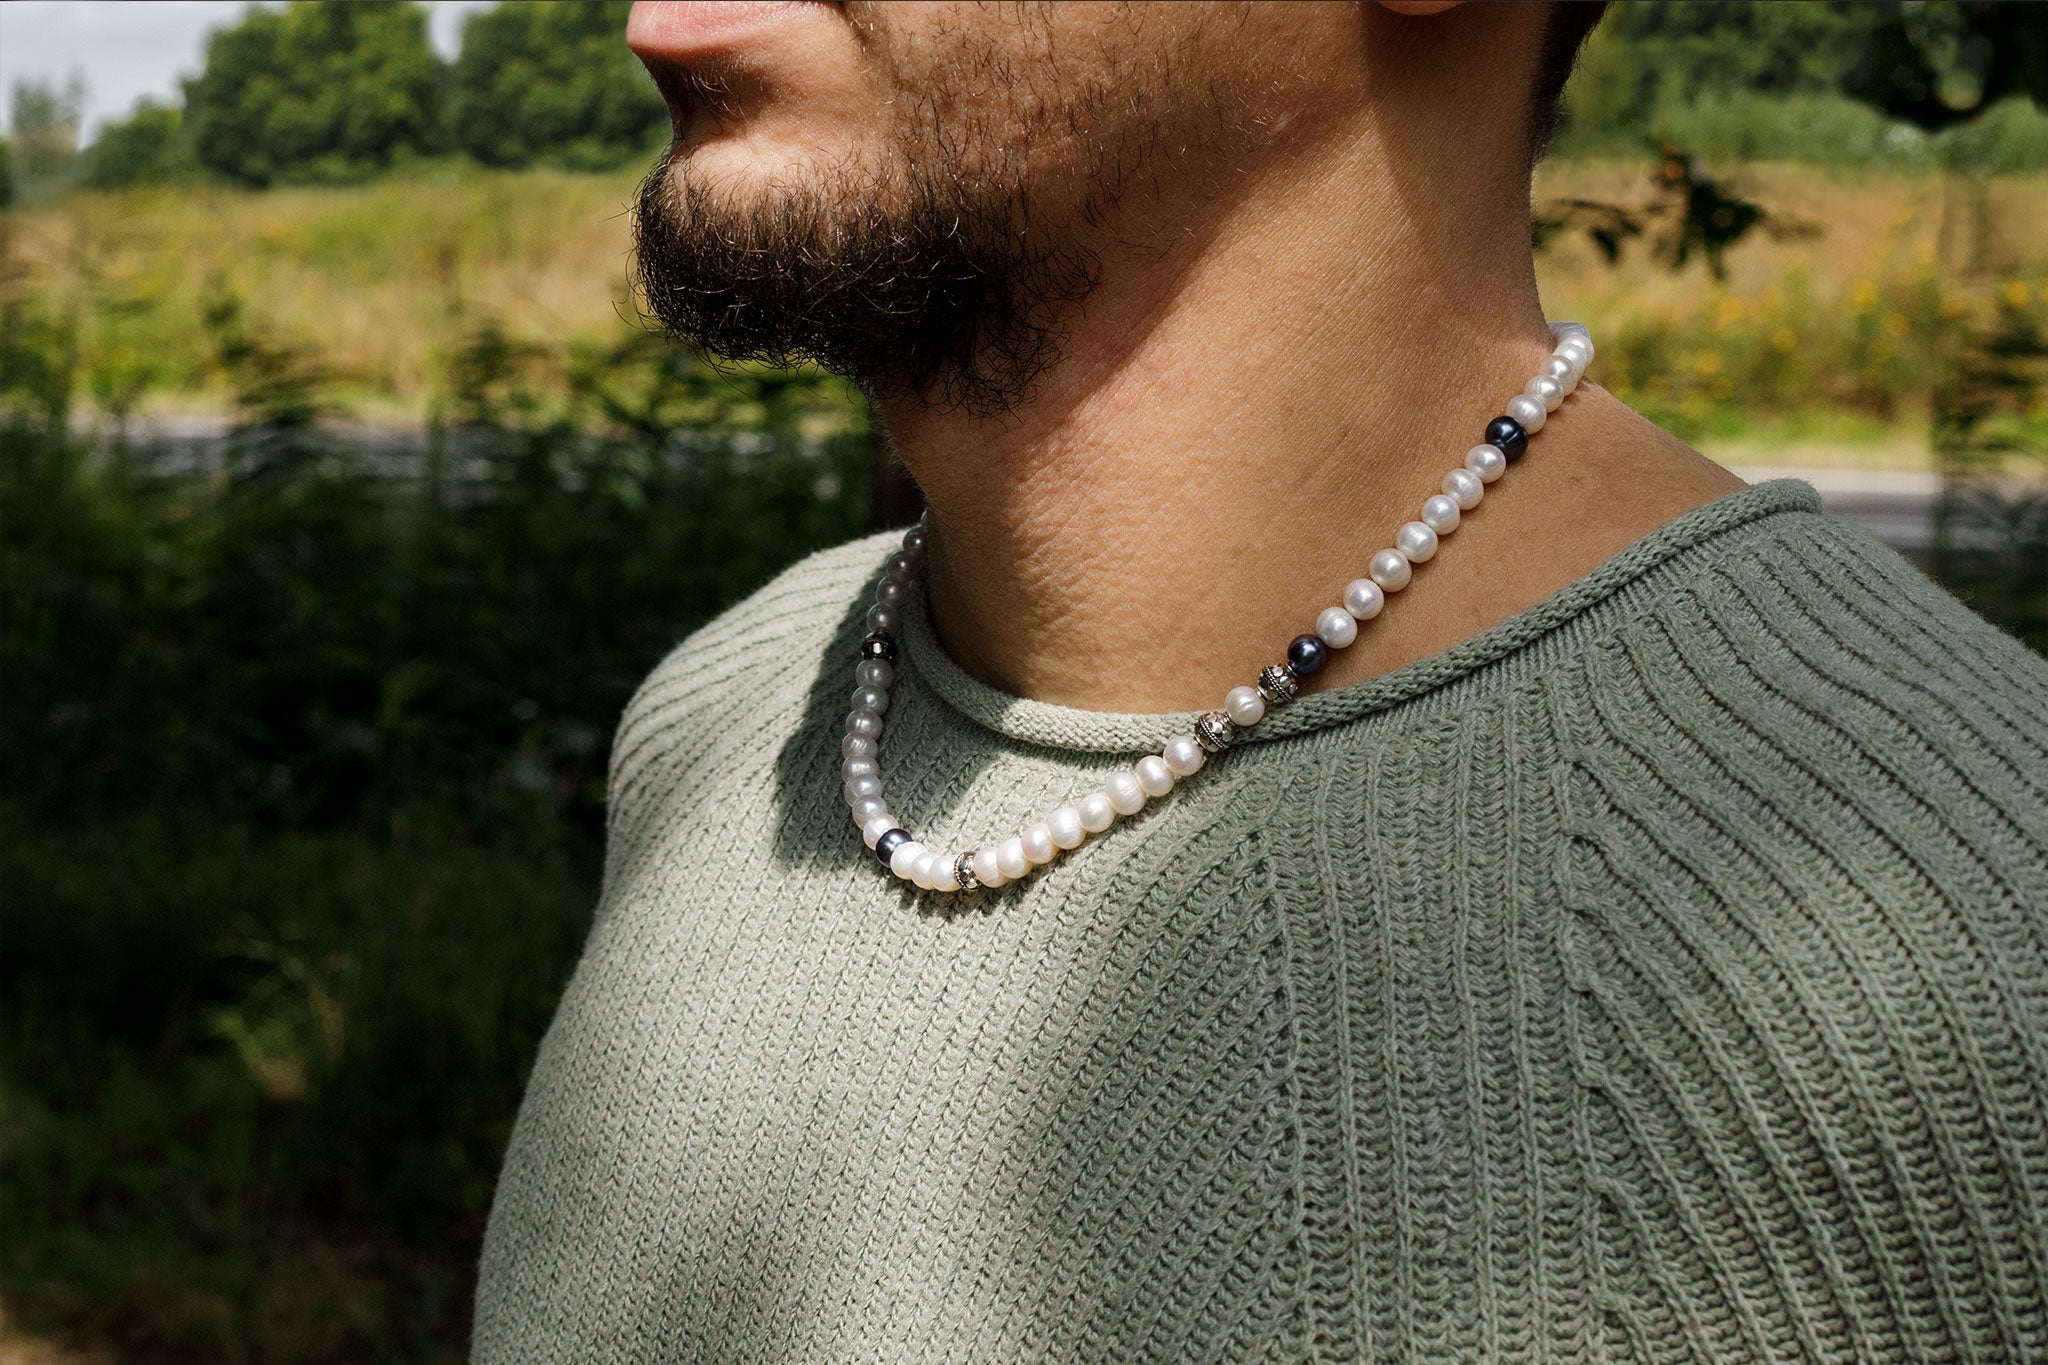 Pearl Necklace XI (7-8mm) (6860621742134)